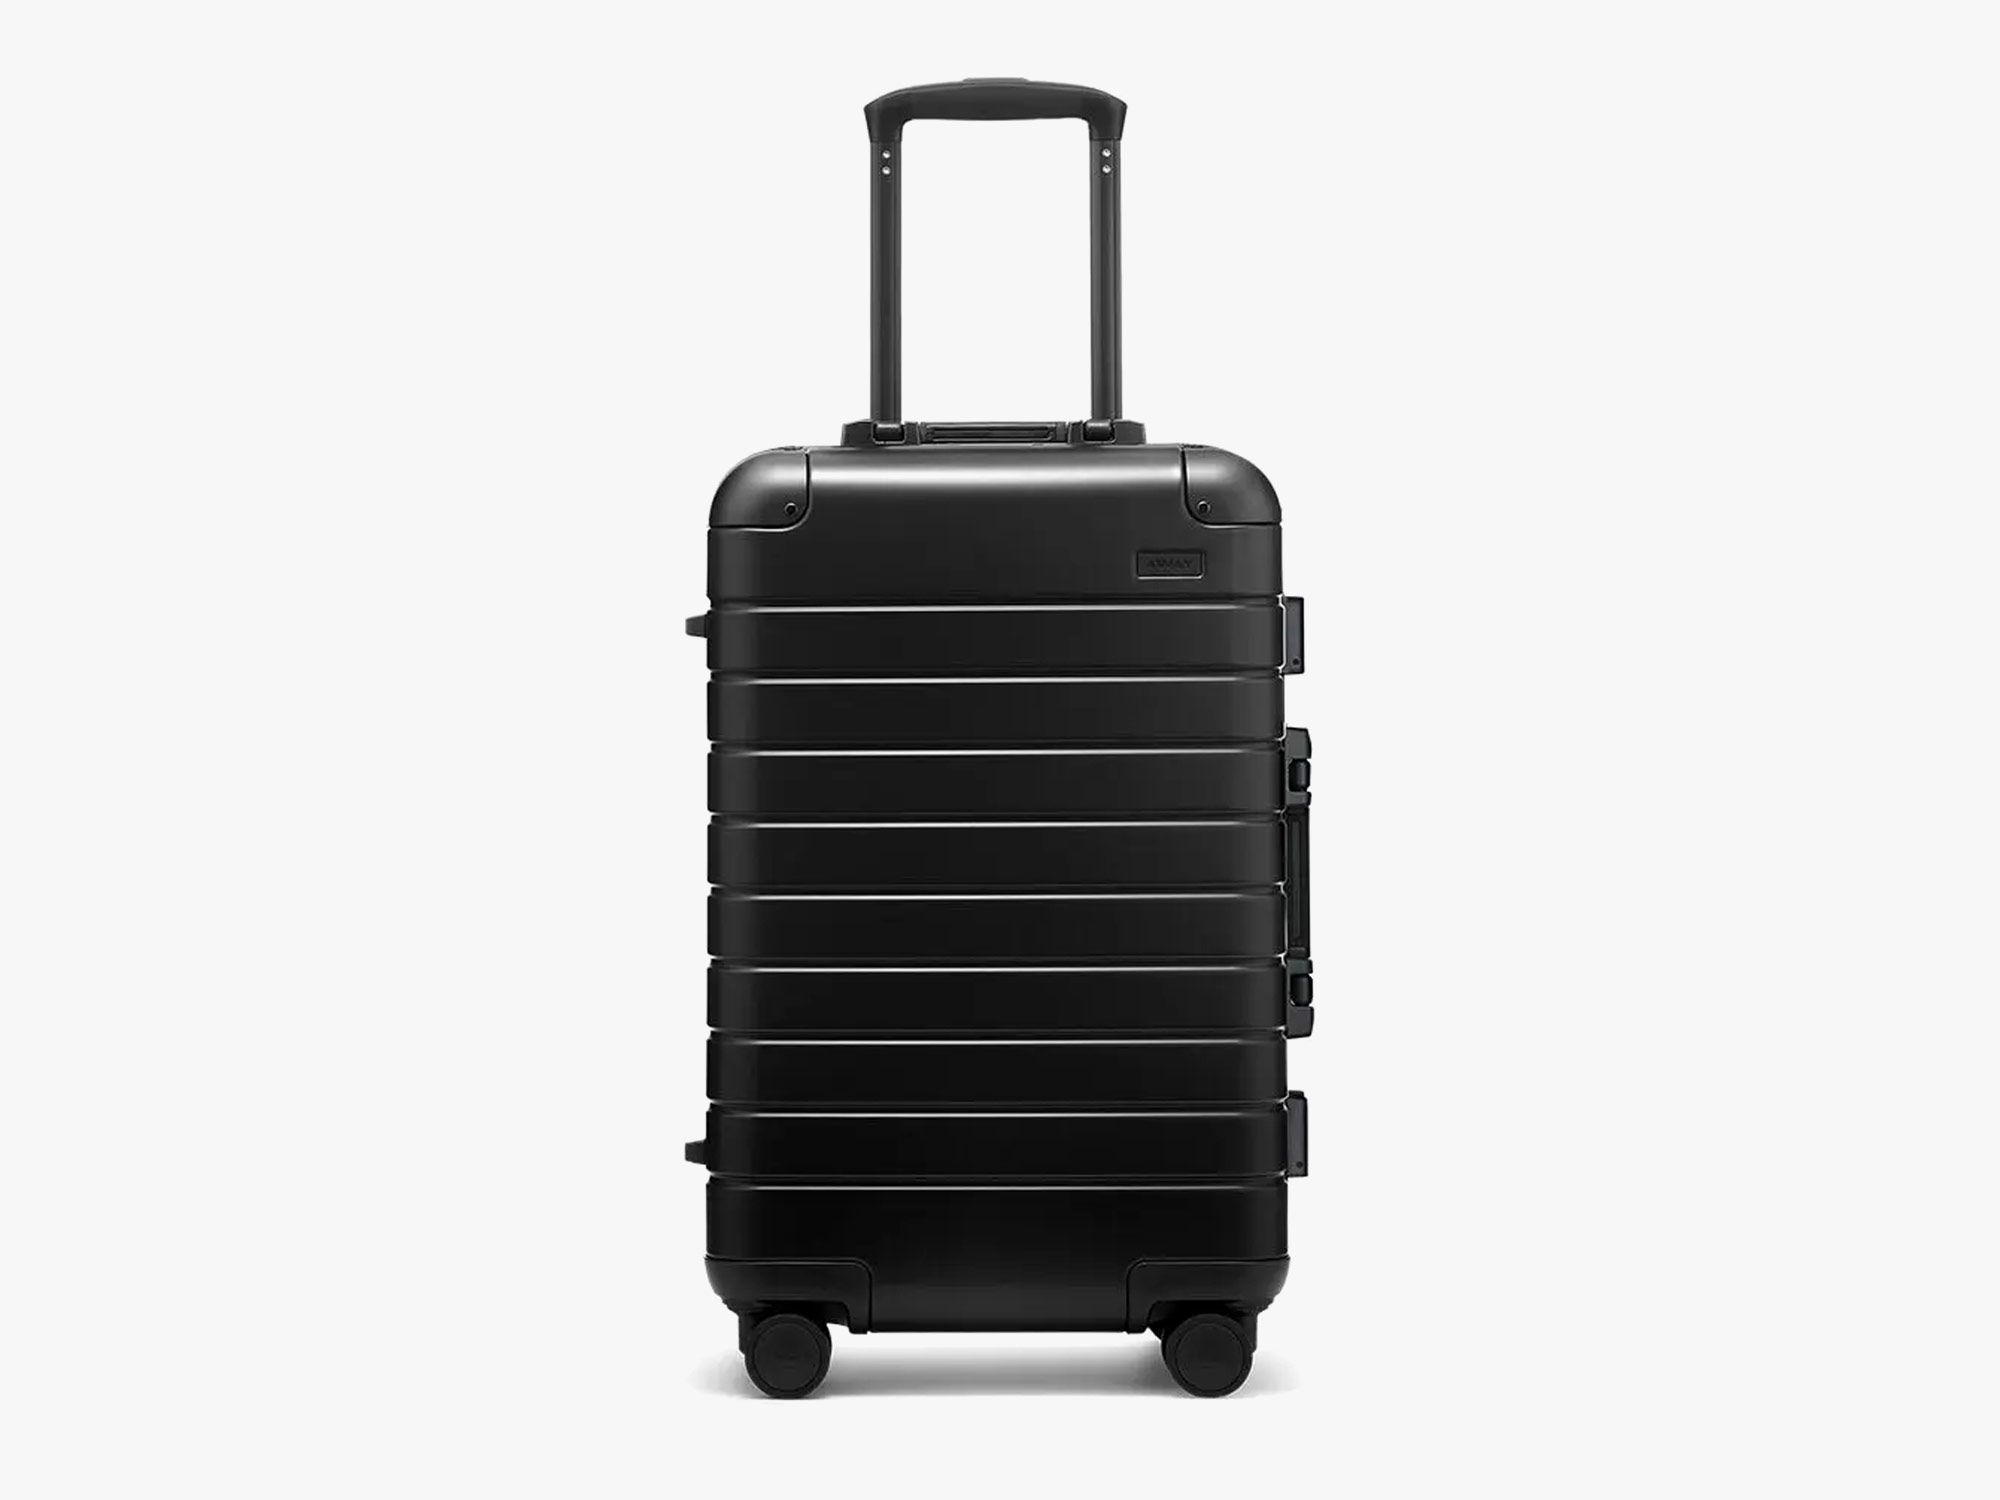 Away luggage, or suitcases for millennials